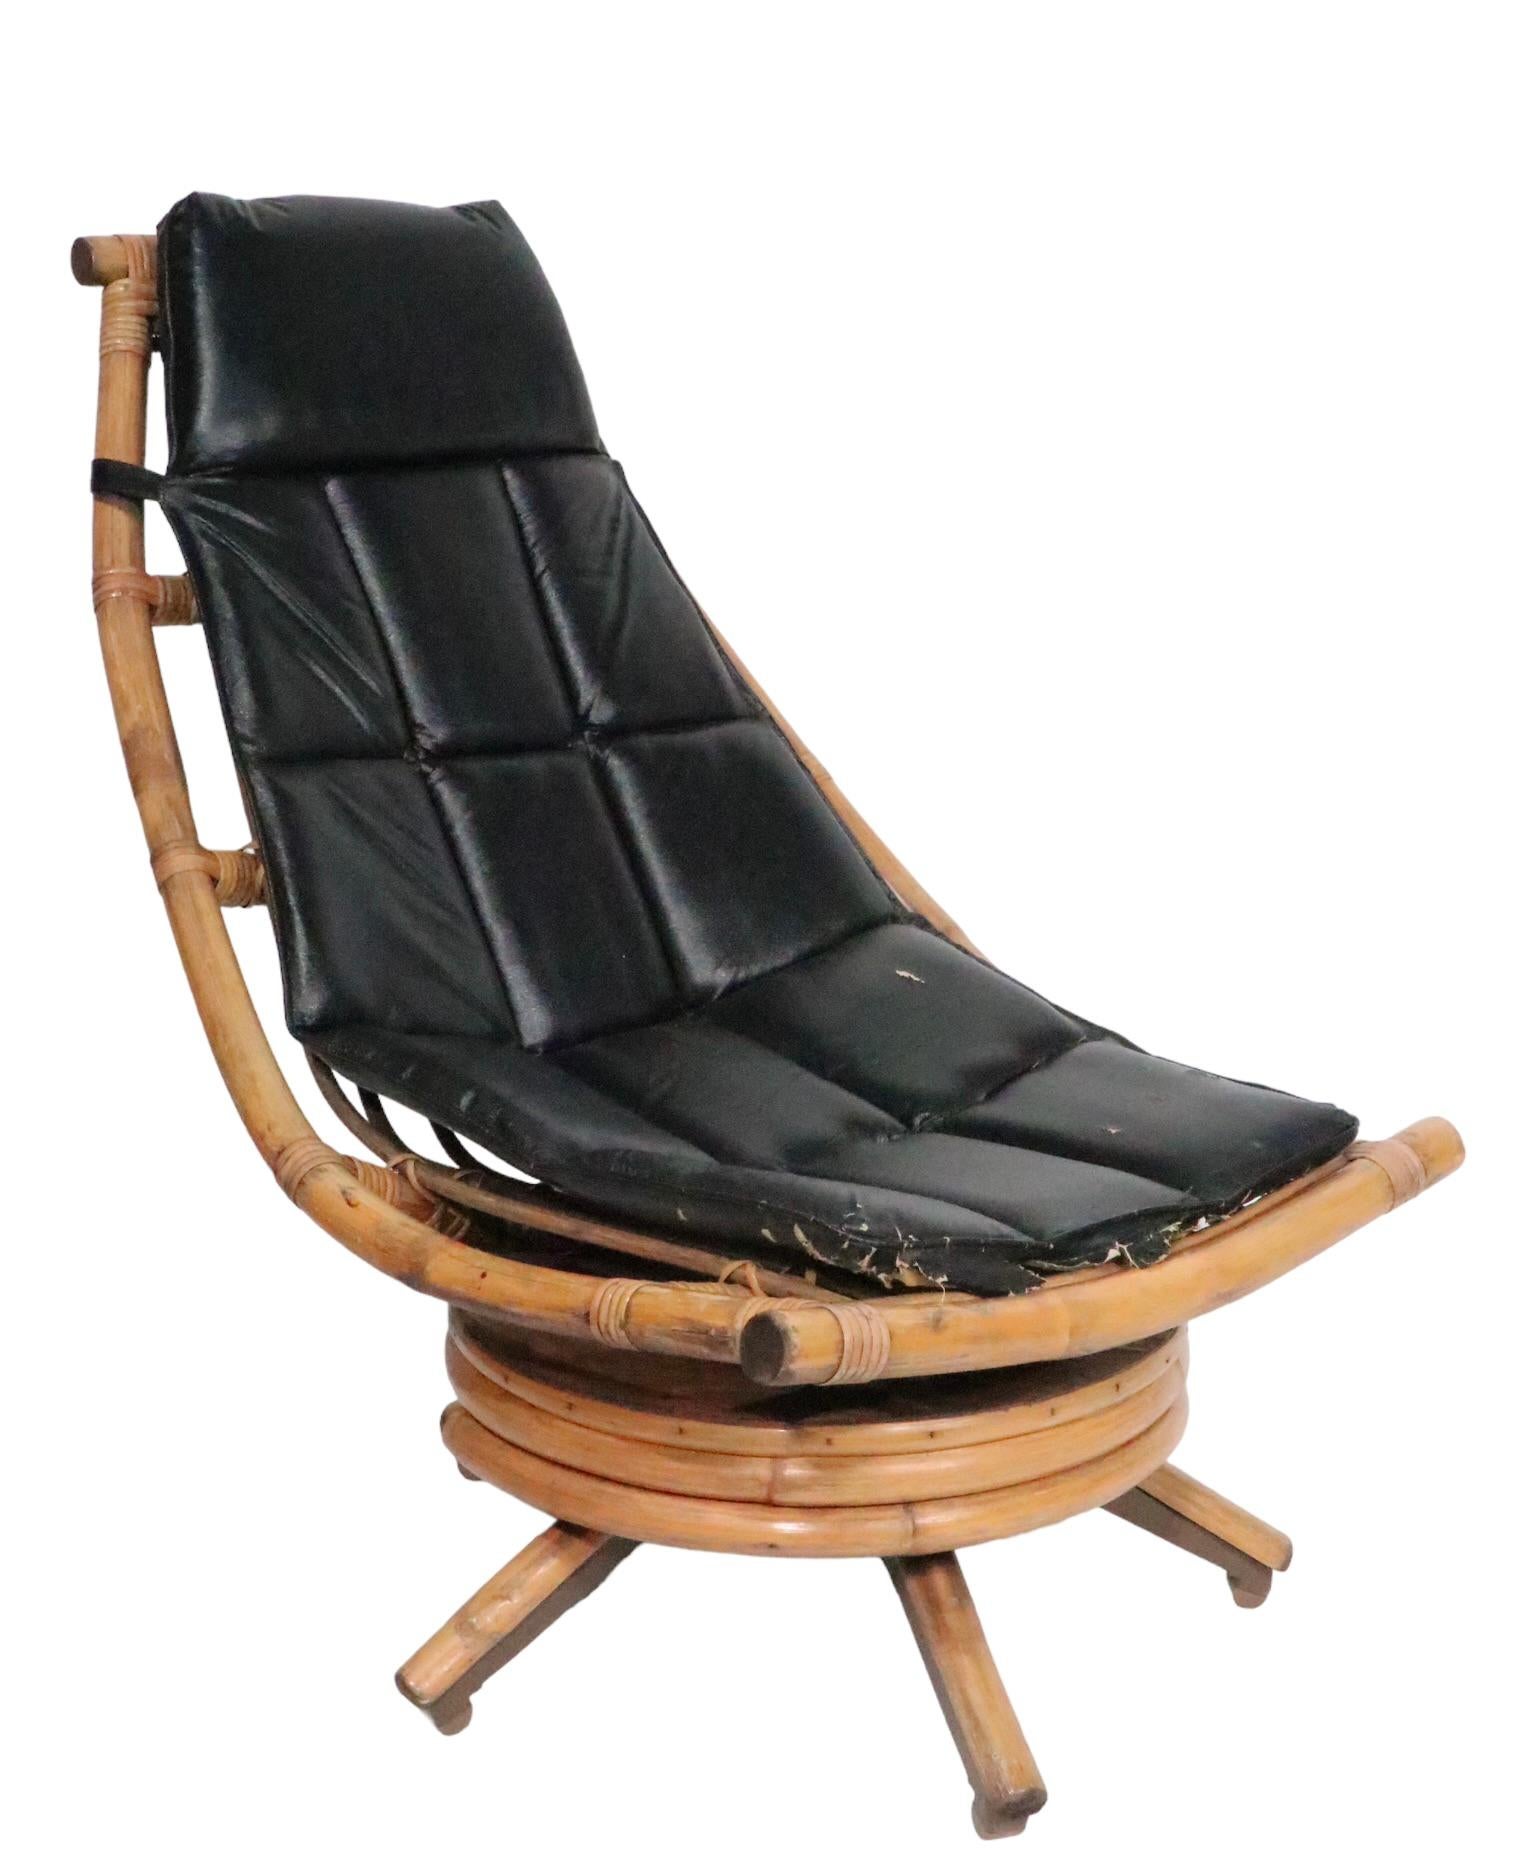 Midcentury Swivel Tilt Bamboo Lounge Chaise Chair, circa 1950/ 1960s For Sale 8